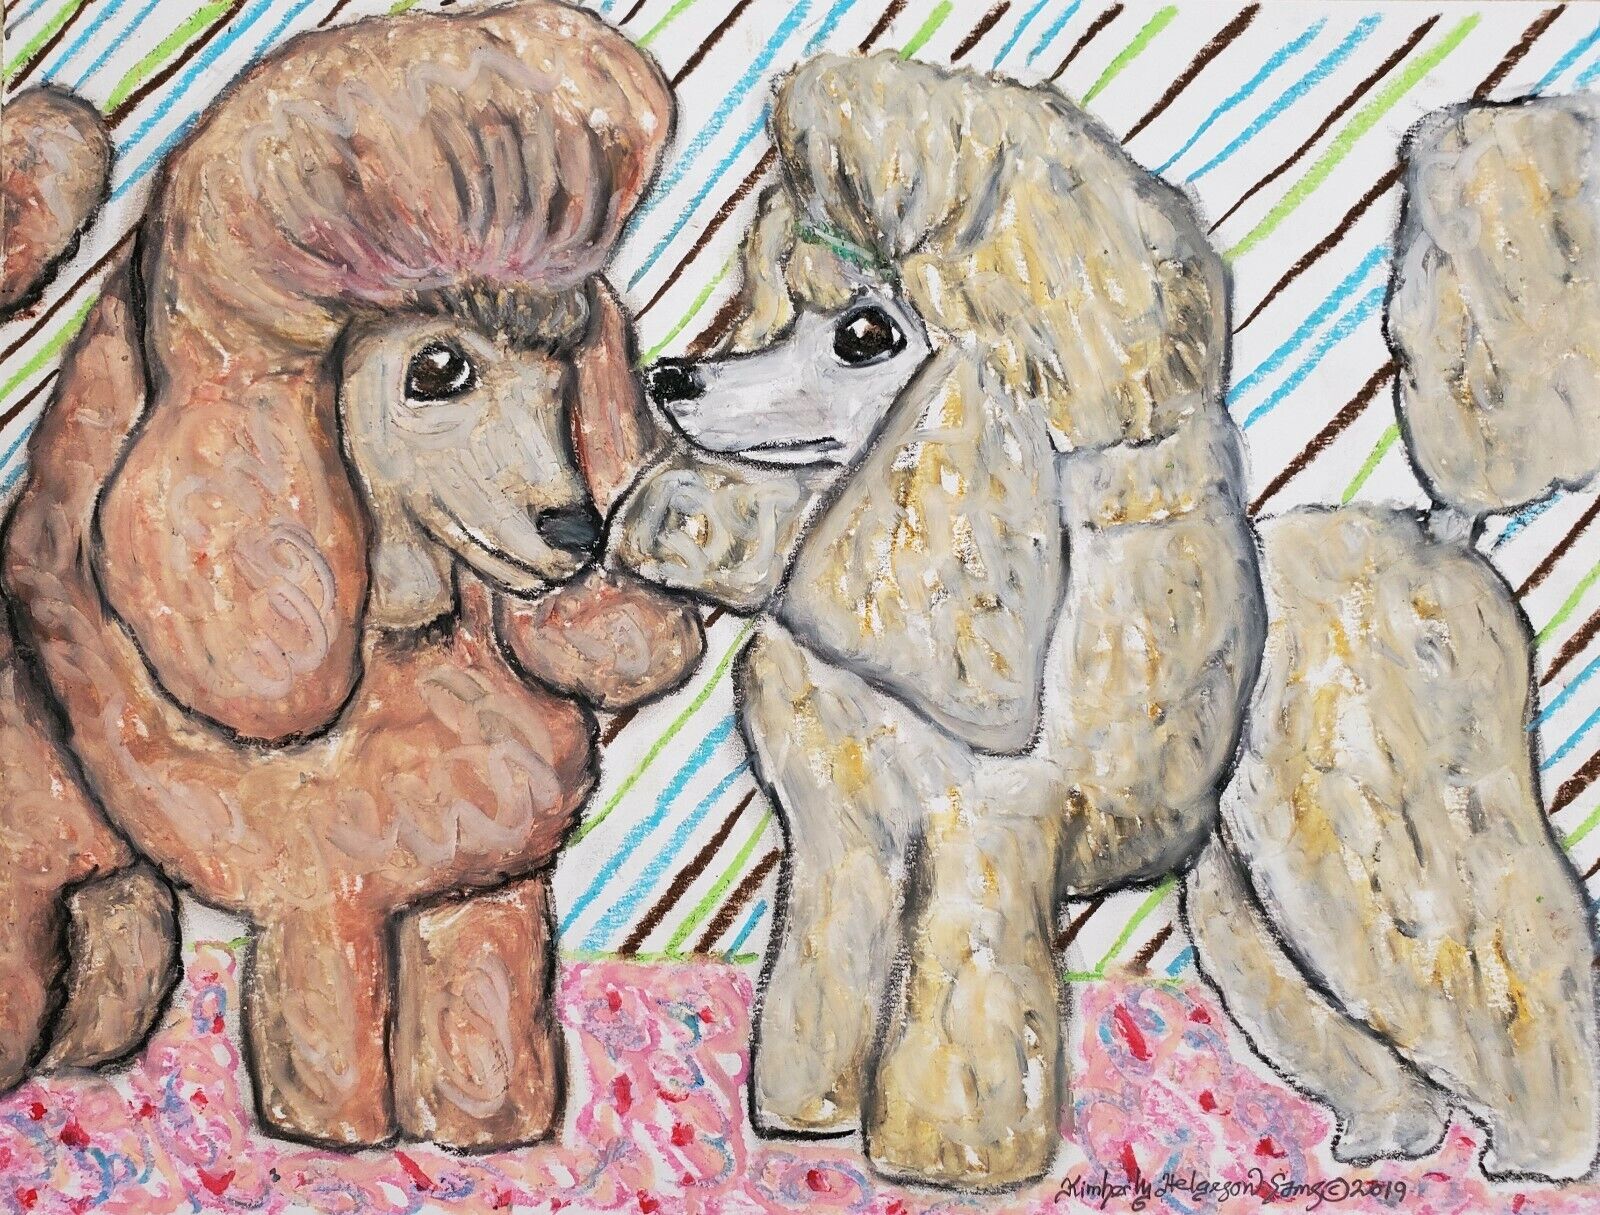 Toy Poodle Pop Art ORIGINAL Painting 9x12 Signed by Artist KSAMS Dog Collectible